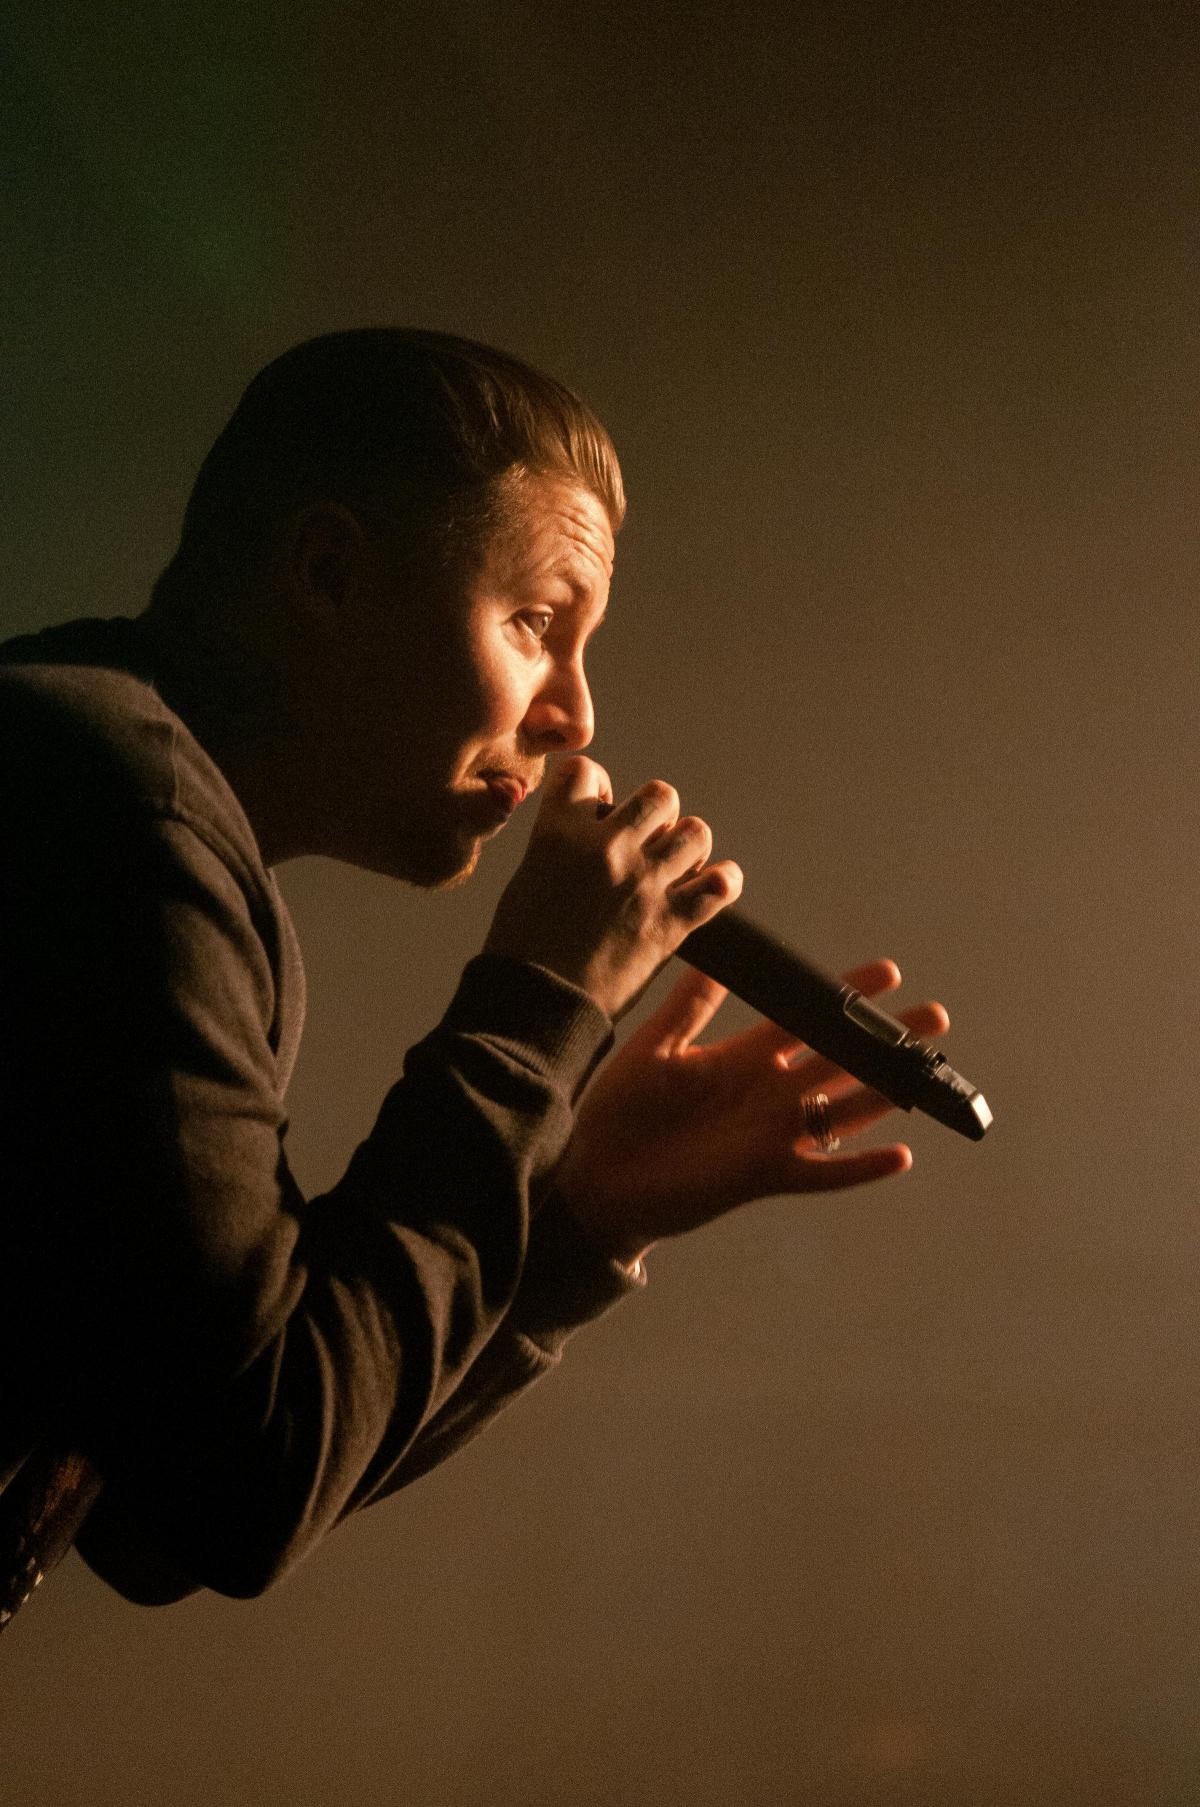 Professor Green performing at the University of Southampton's Students' Union